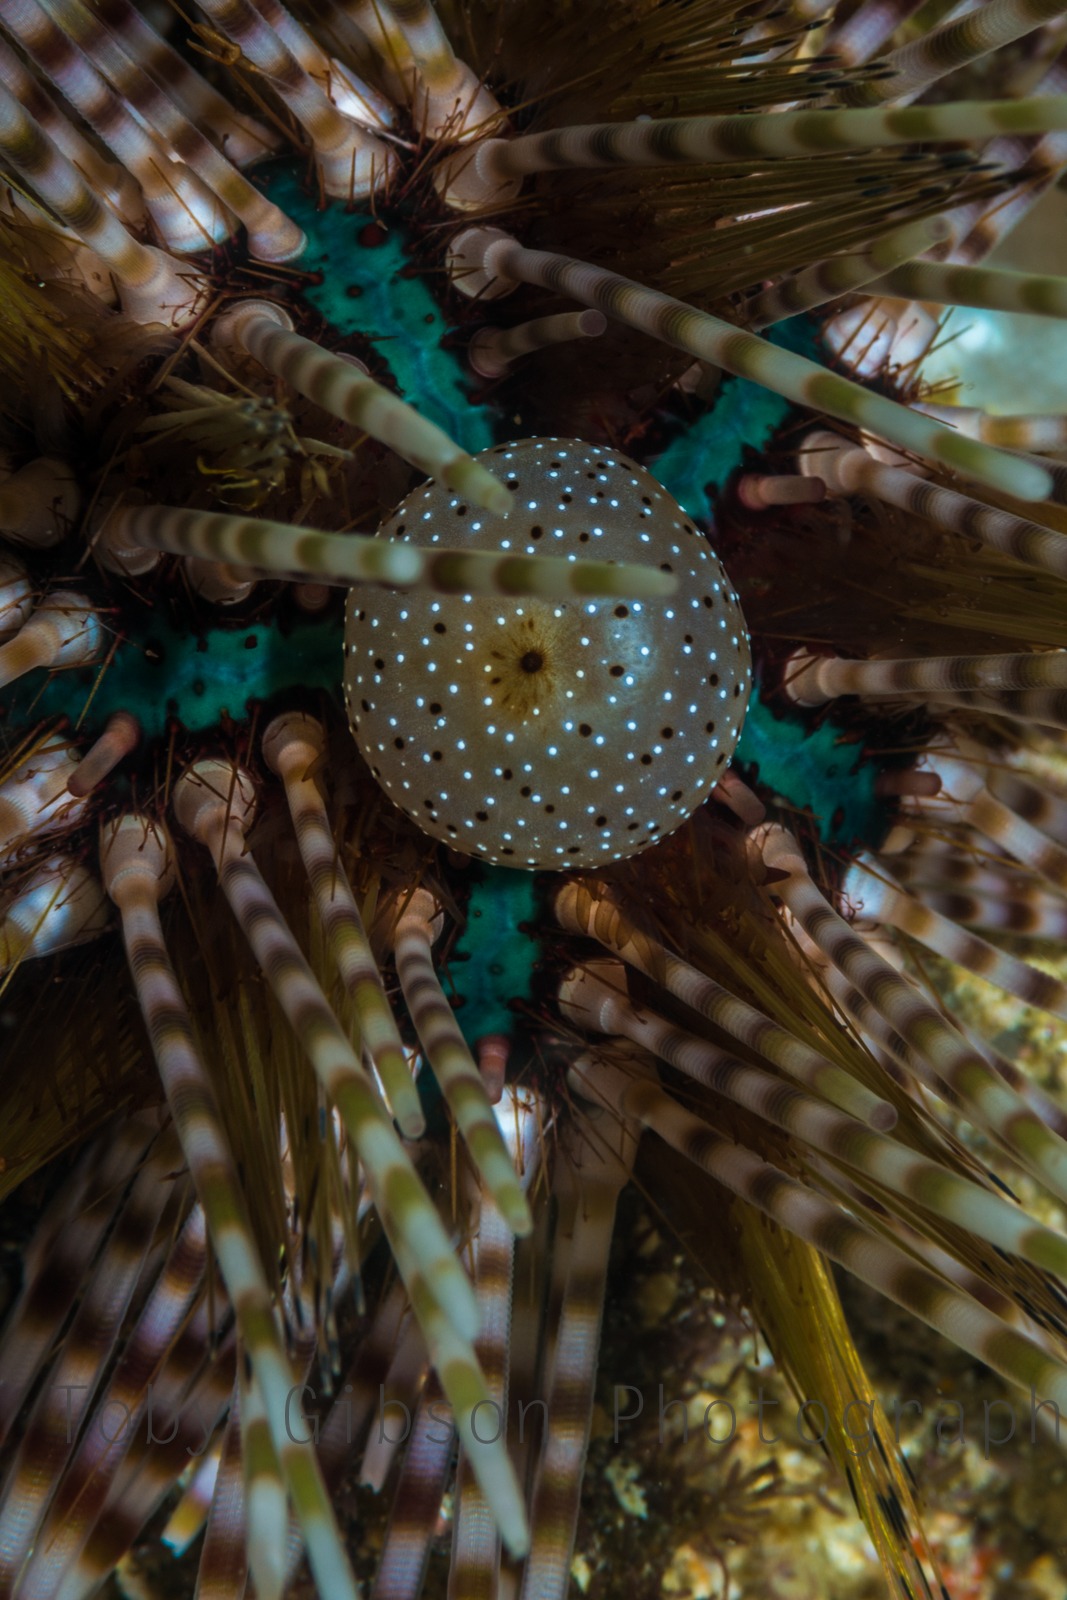 Double-spined or banded sea urchin